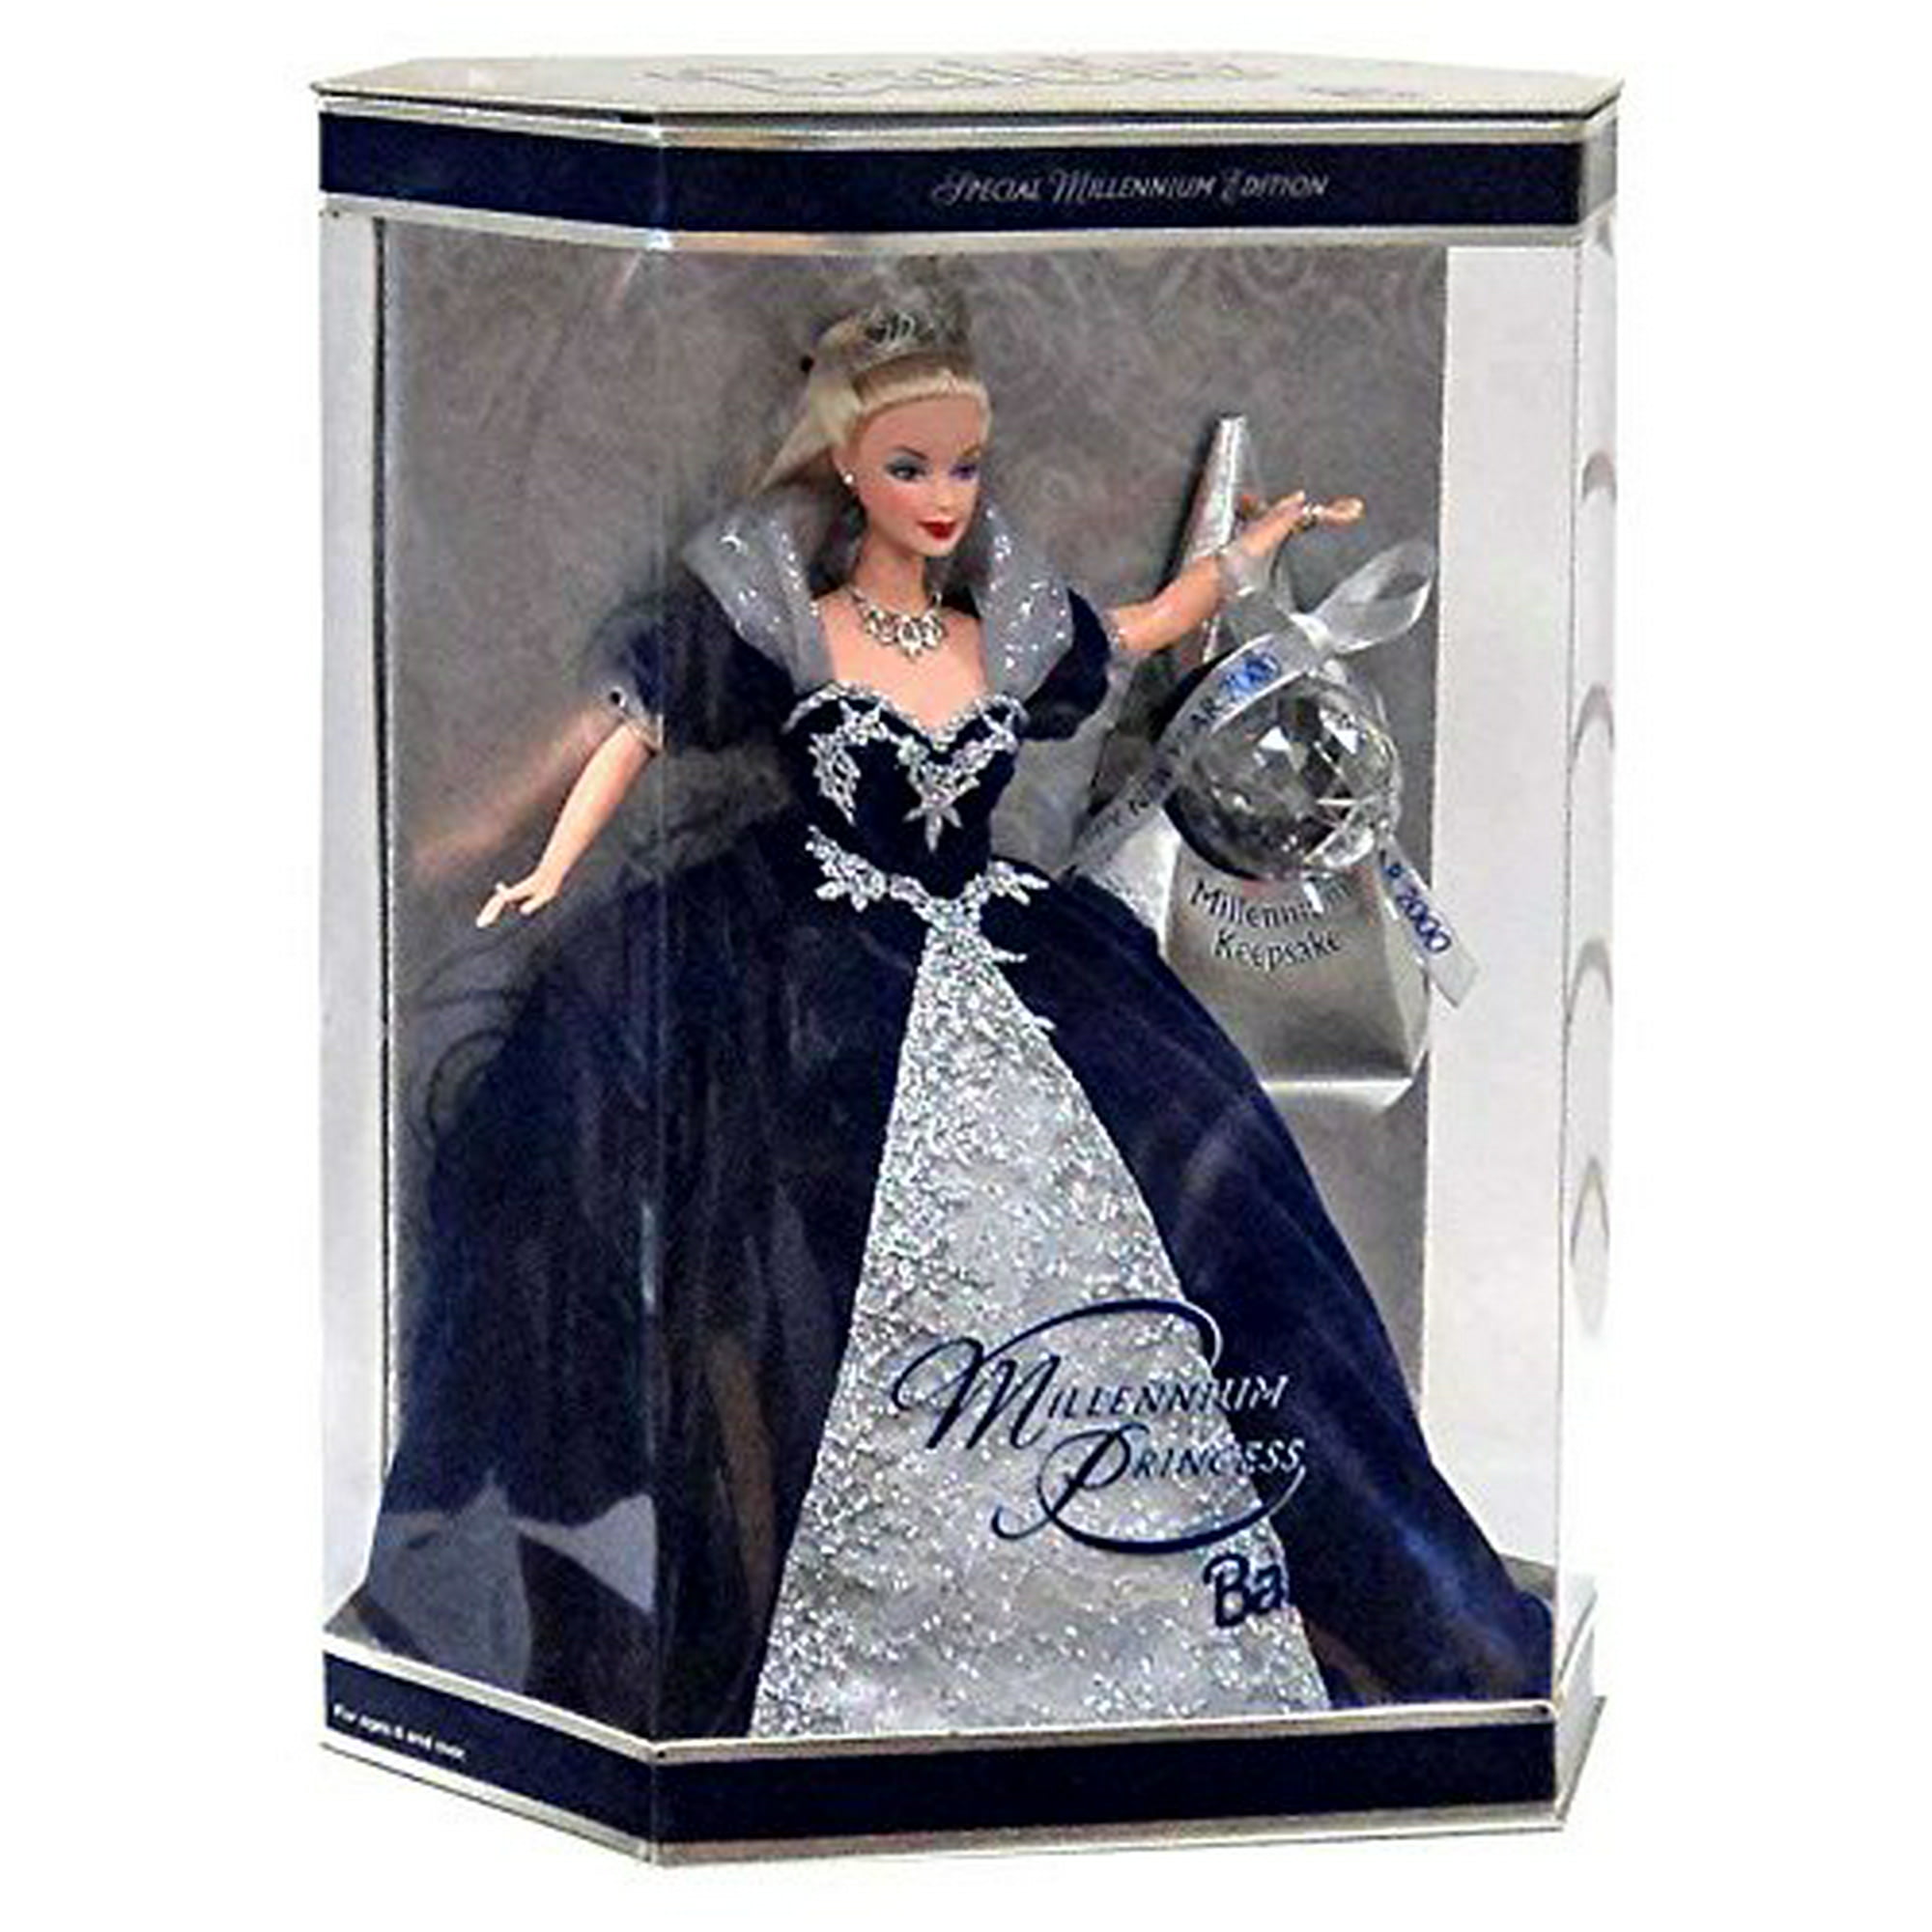 Holiday Barbie Special Edition Millennium Princess Mattel Year 1999 2000  with Swirl Background Inside Box